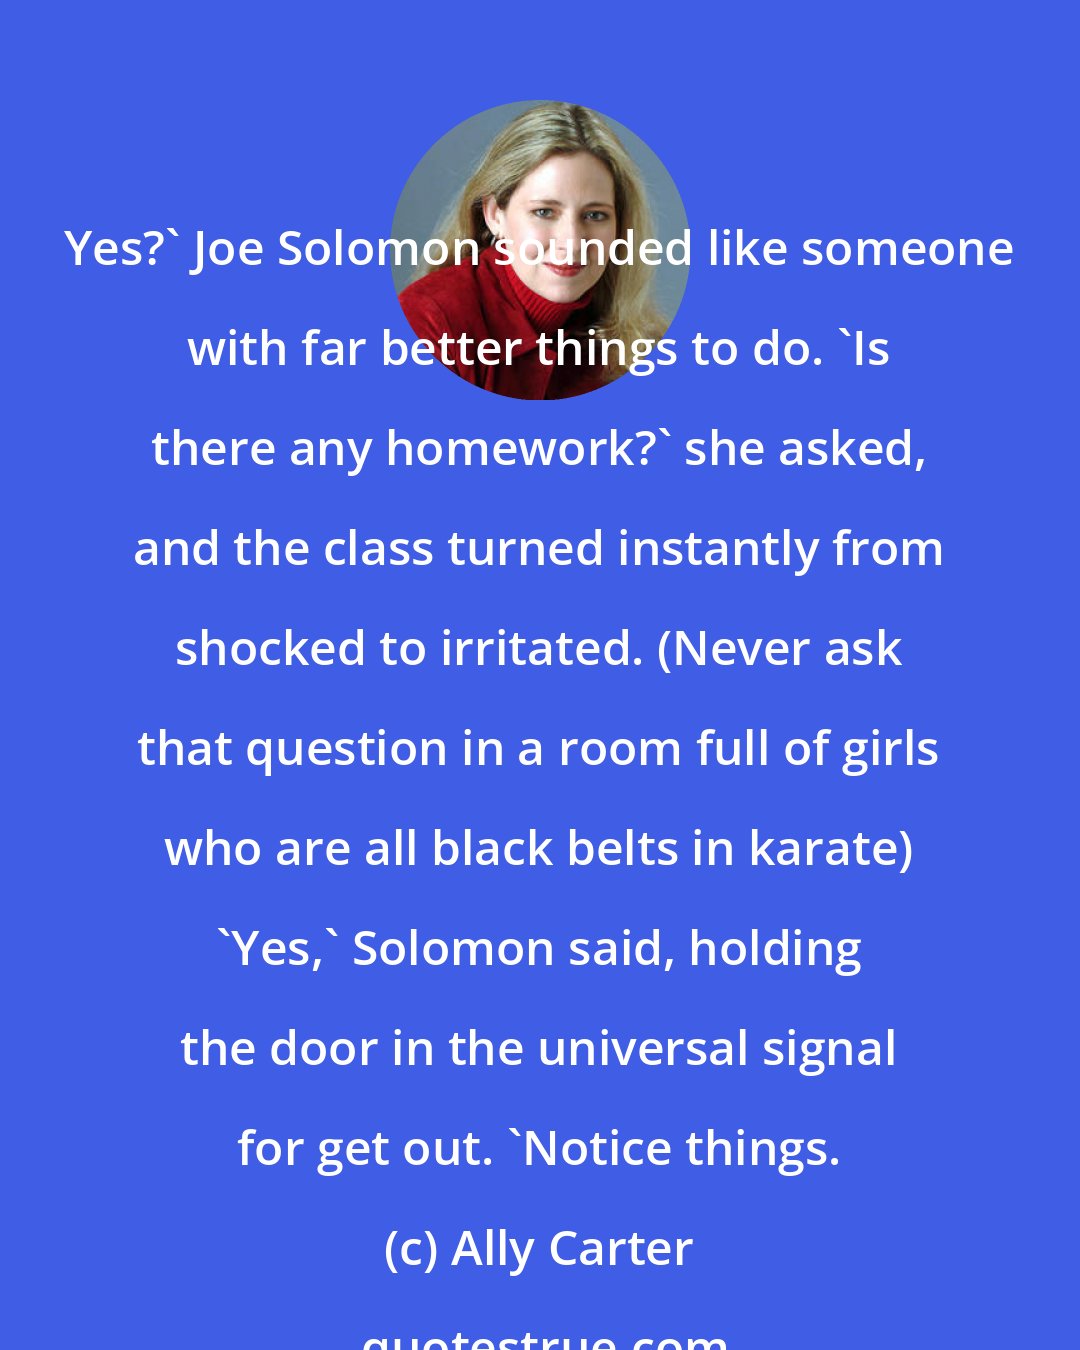 Ally Carter: Yes?' Joe Solomon sounded like someone with far better things to do. 'Is there any homework?' she asked, and the class turned instantly from shocked to irritated. (Never ask that question in a room full of girls who are all black belts in karate) 'Yes,' Solomon said, holding the door in the universal signal for get out. 'Notice things.